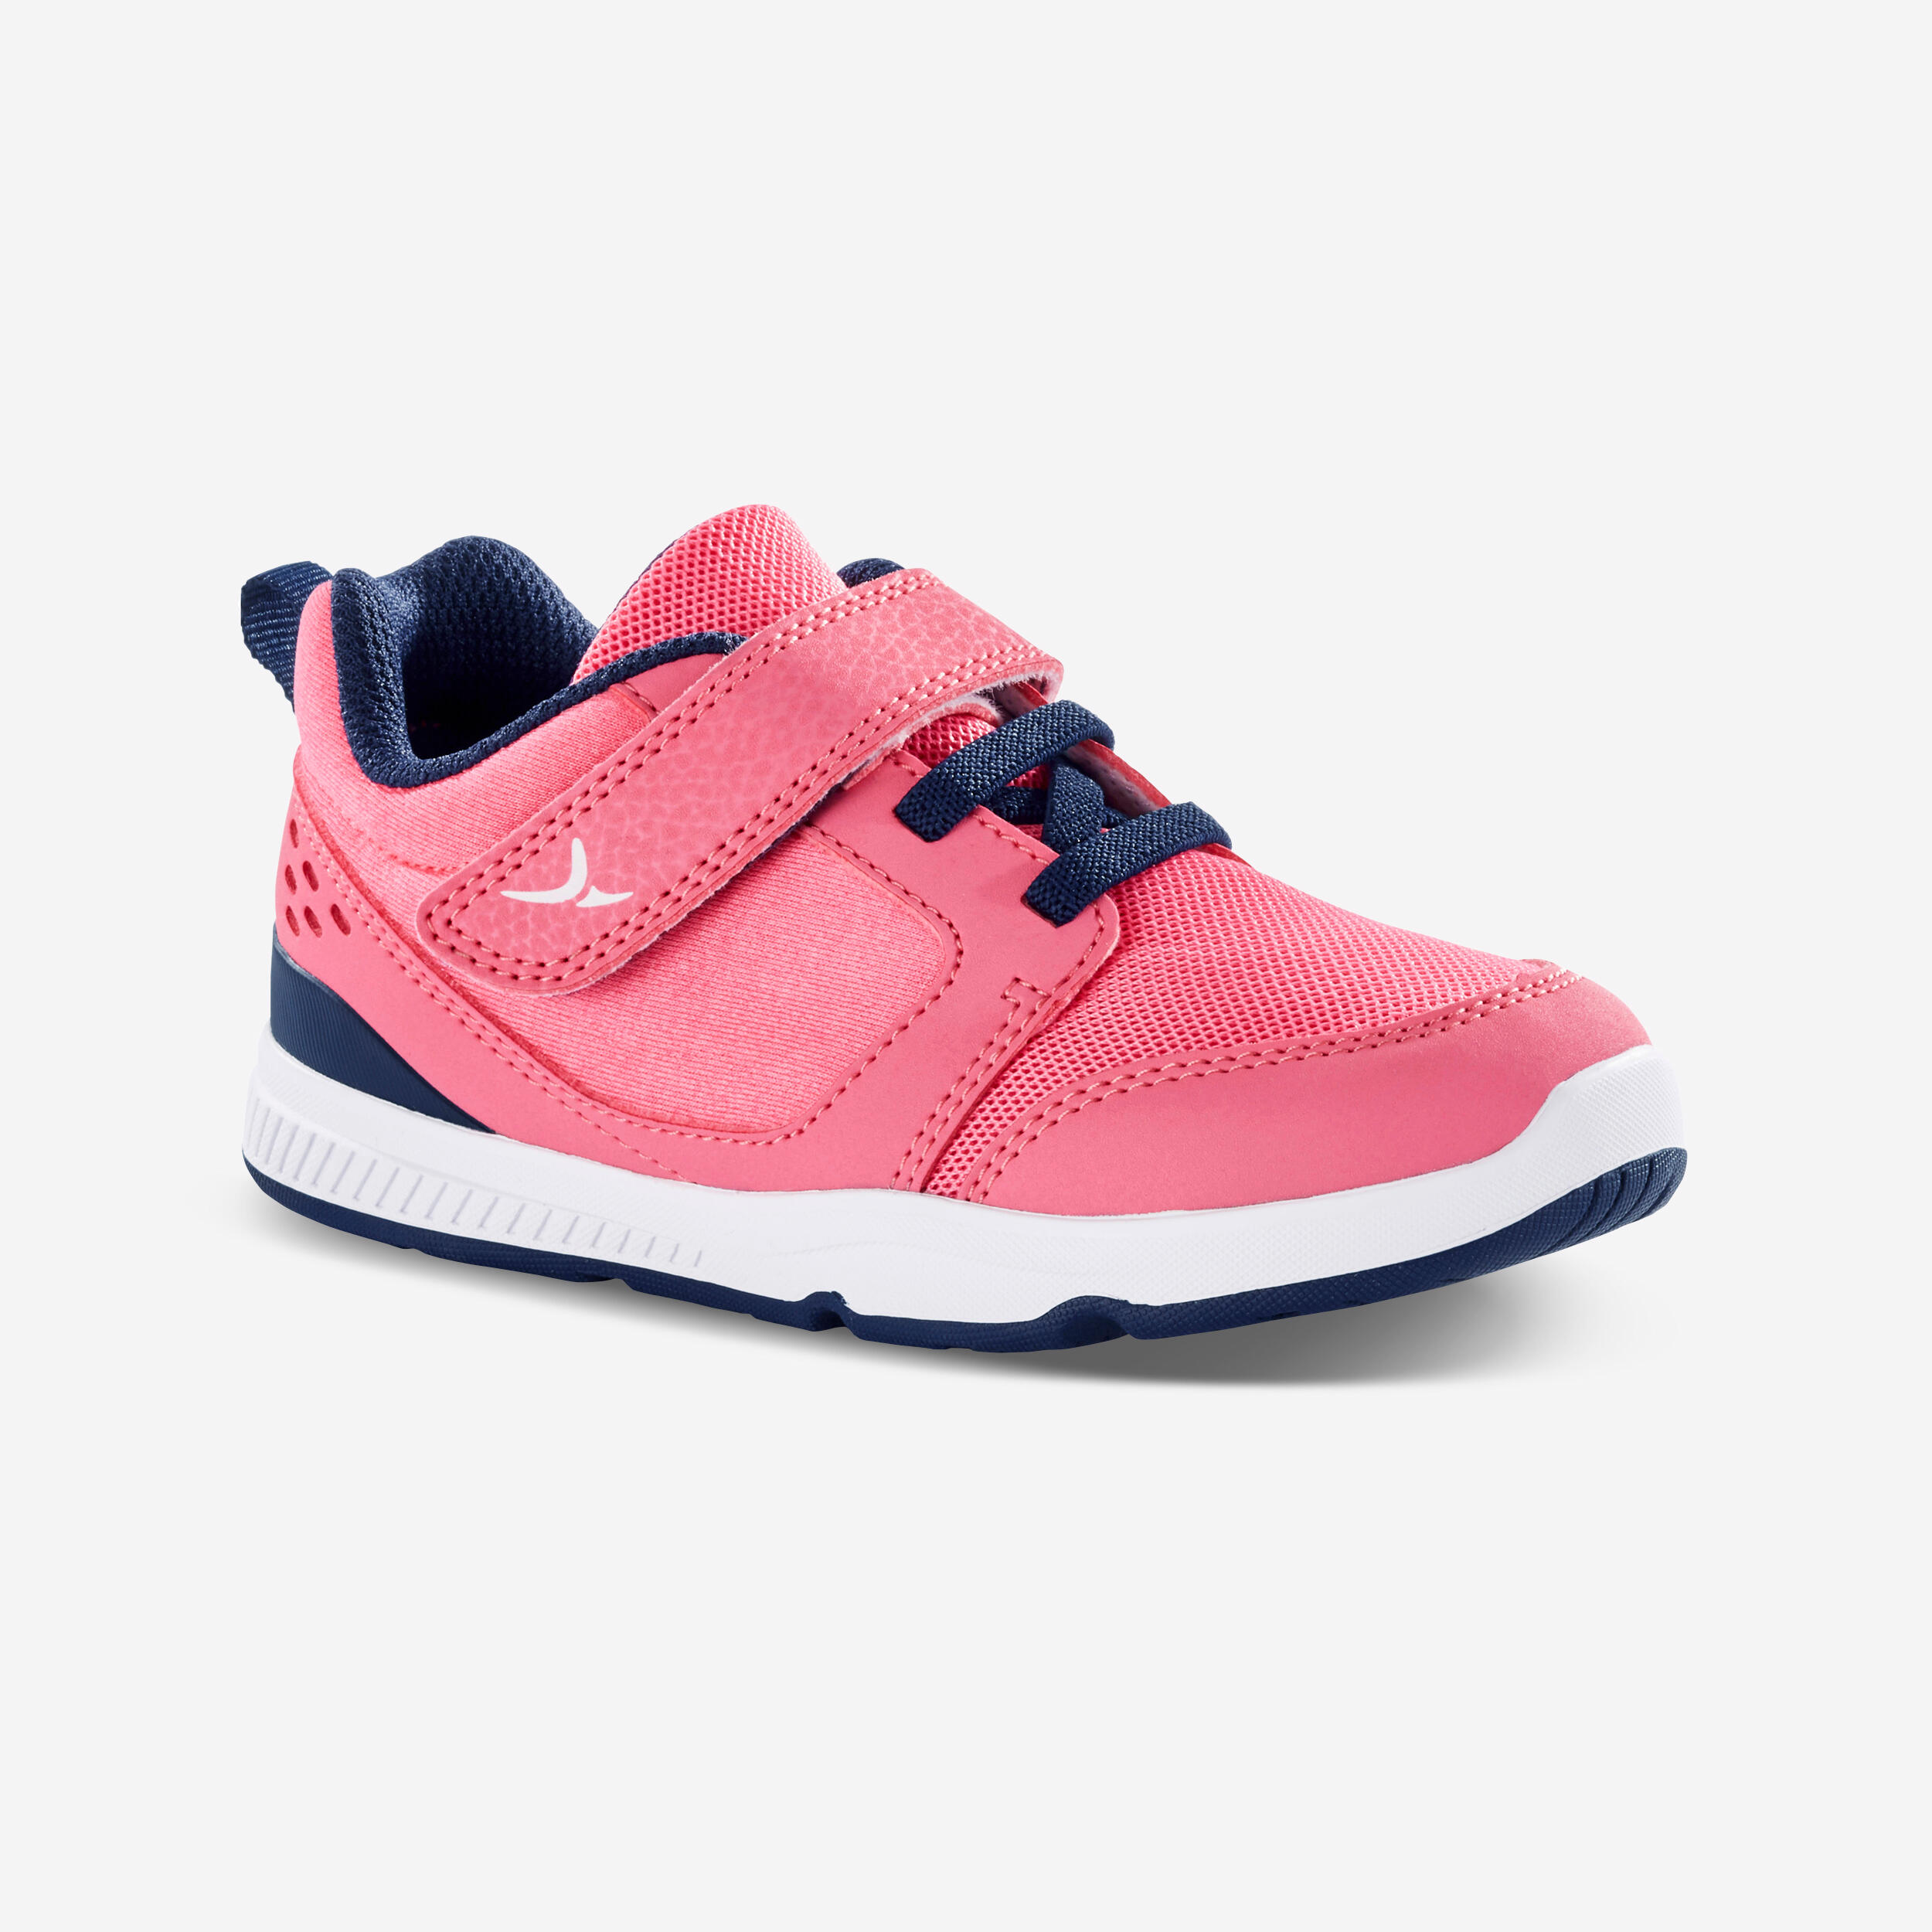 DOMYOS Kids' Comfortable and Breathable Shoes